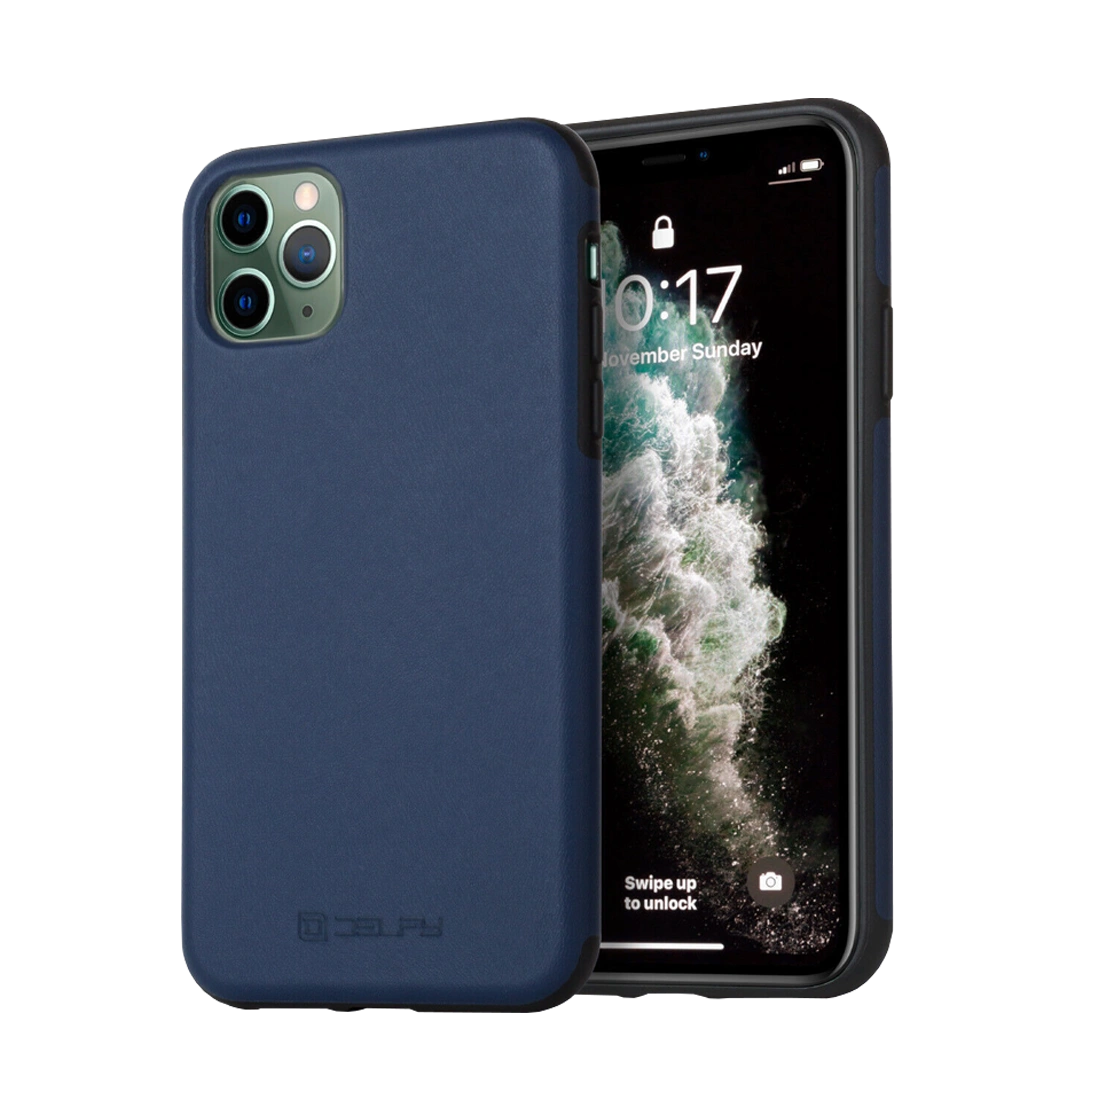 Delfy Derma Case for iPhone 11 Pro